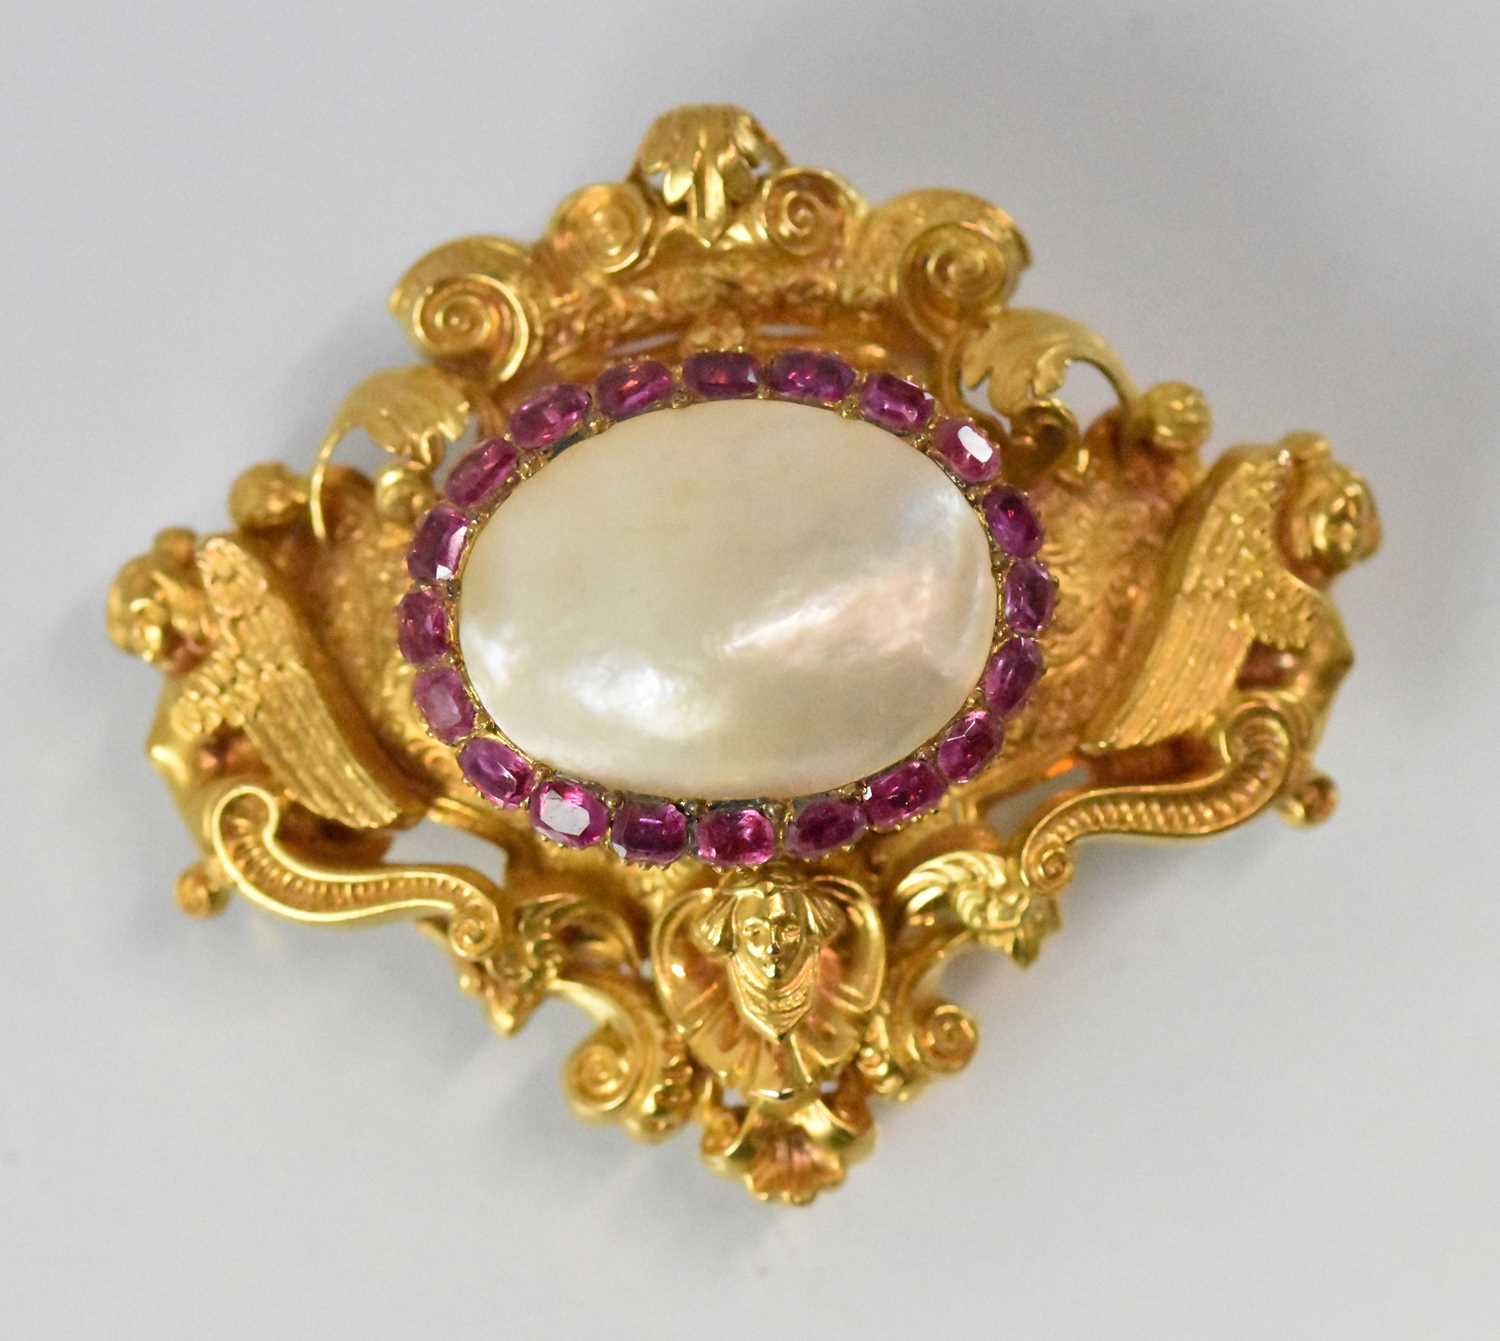 A fine Continental precious yellow metal brooch set with large central pearls surrounded by a border